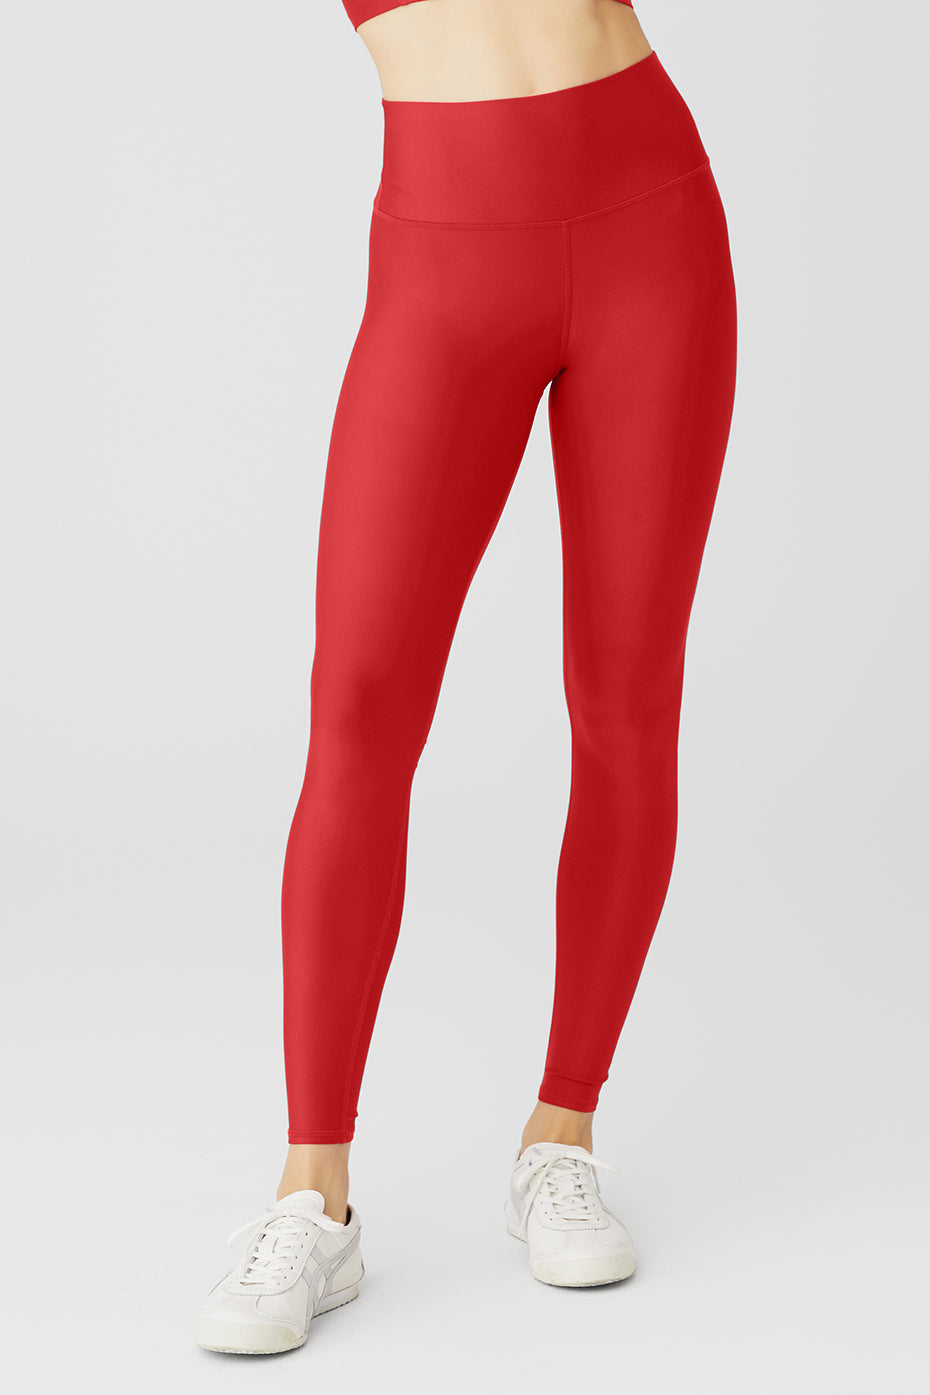 Sporty & Rich Logo Printed High-waisted Leggings in Red